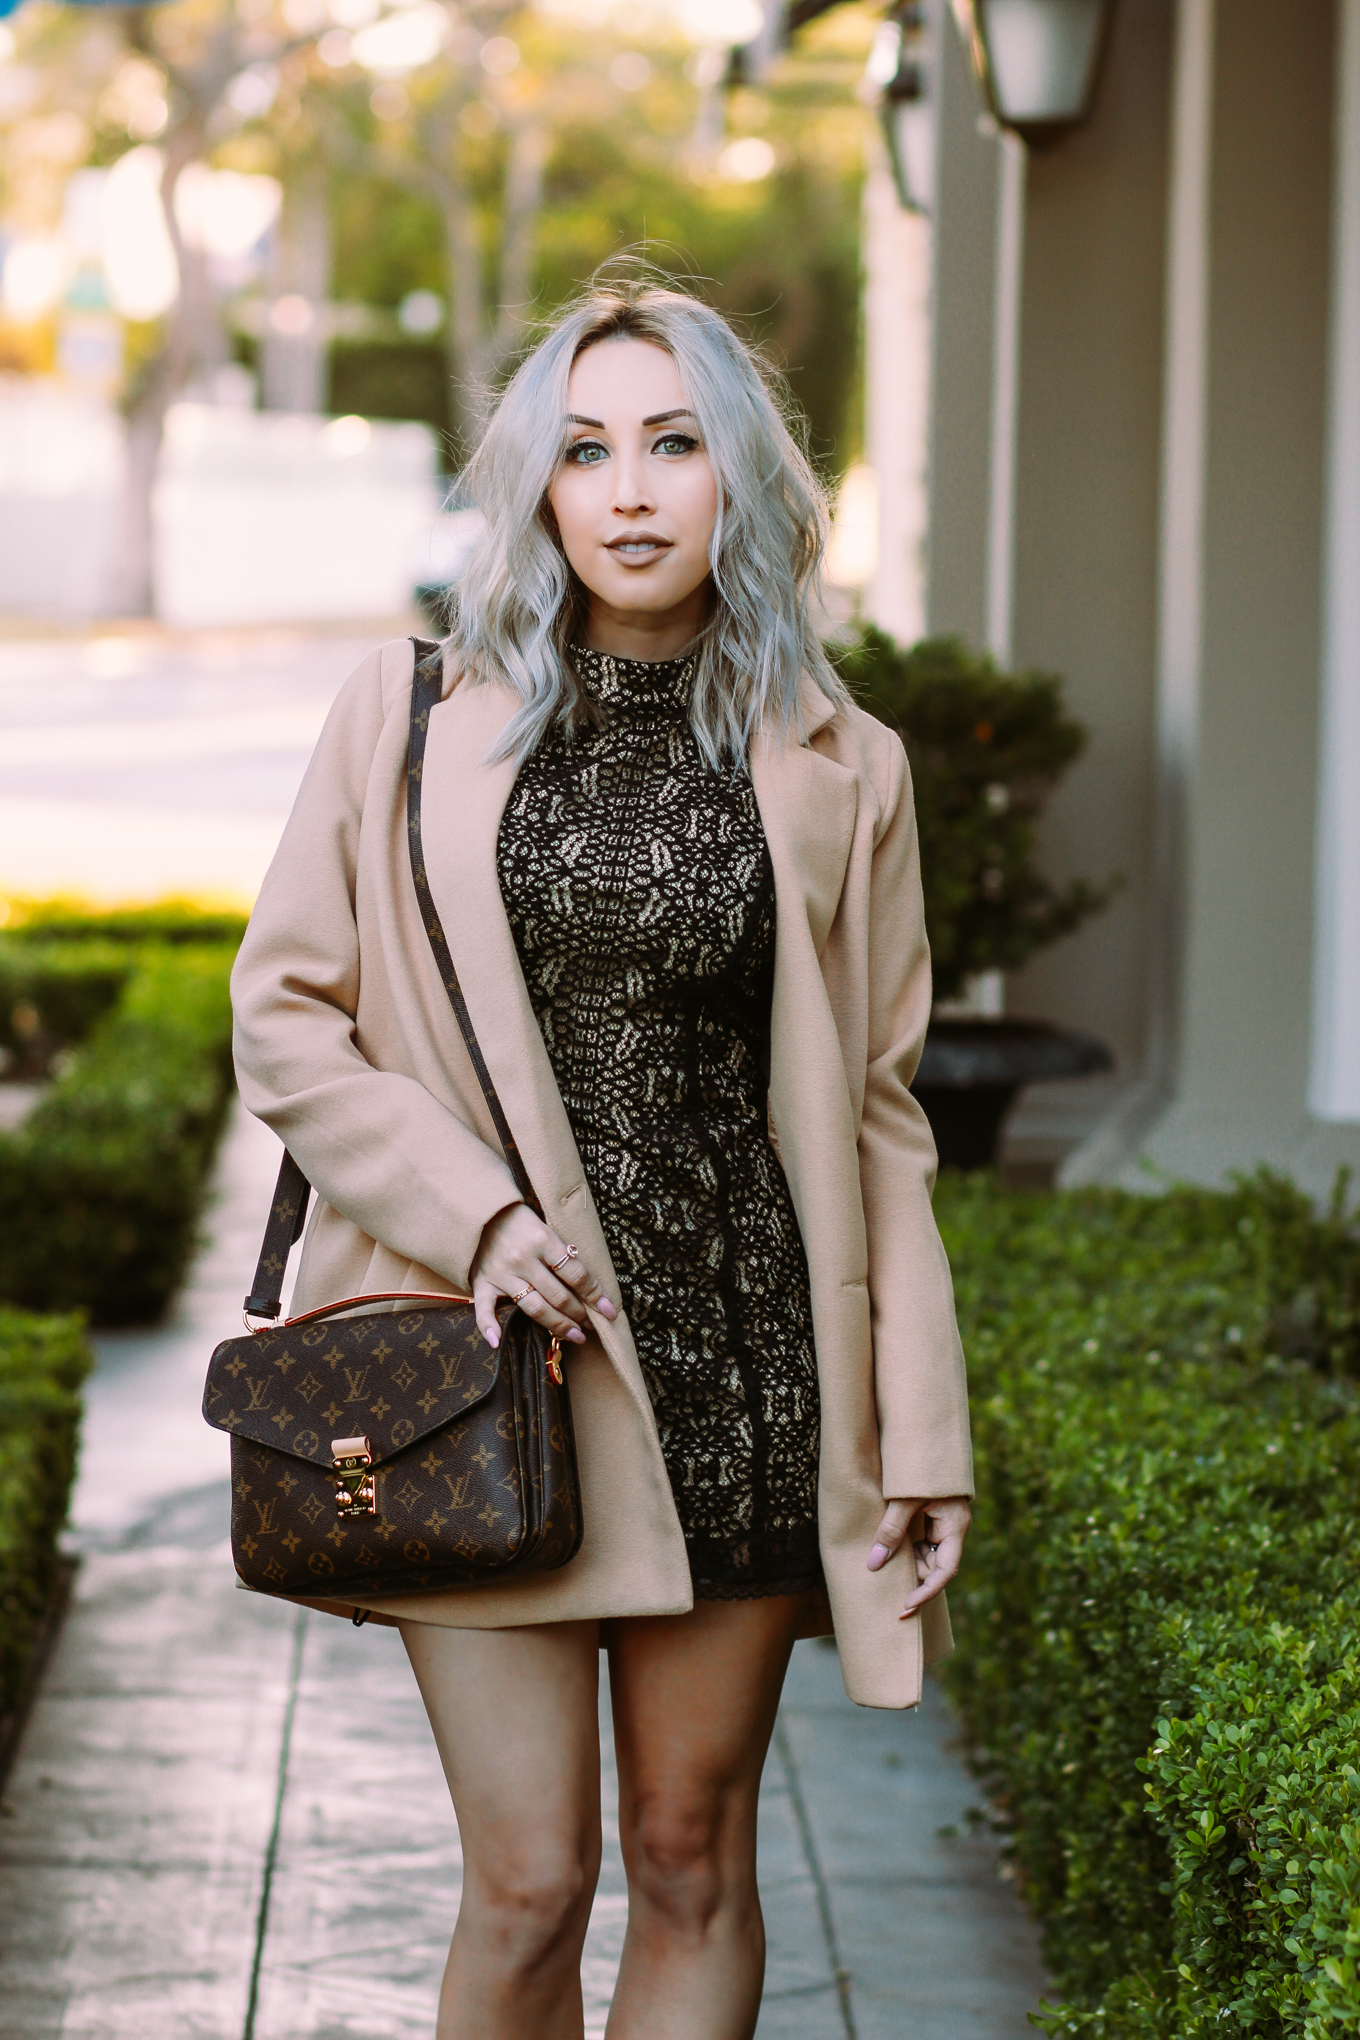 Blondie in the City | Halter Lace Dress, Camel coat, Louis Vuitton Bag | Chic #OOTD